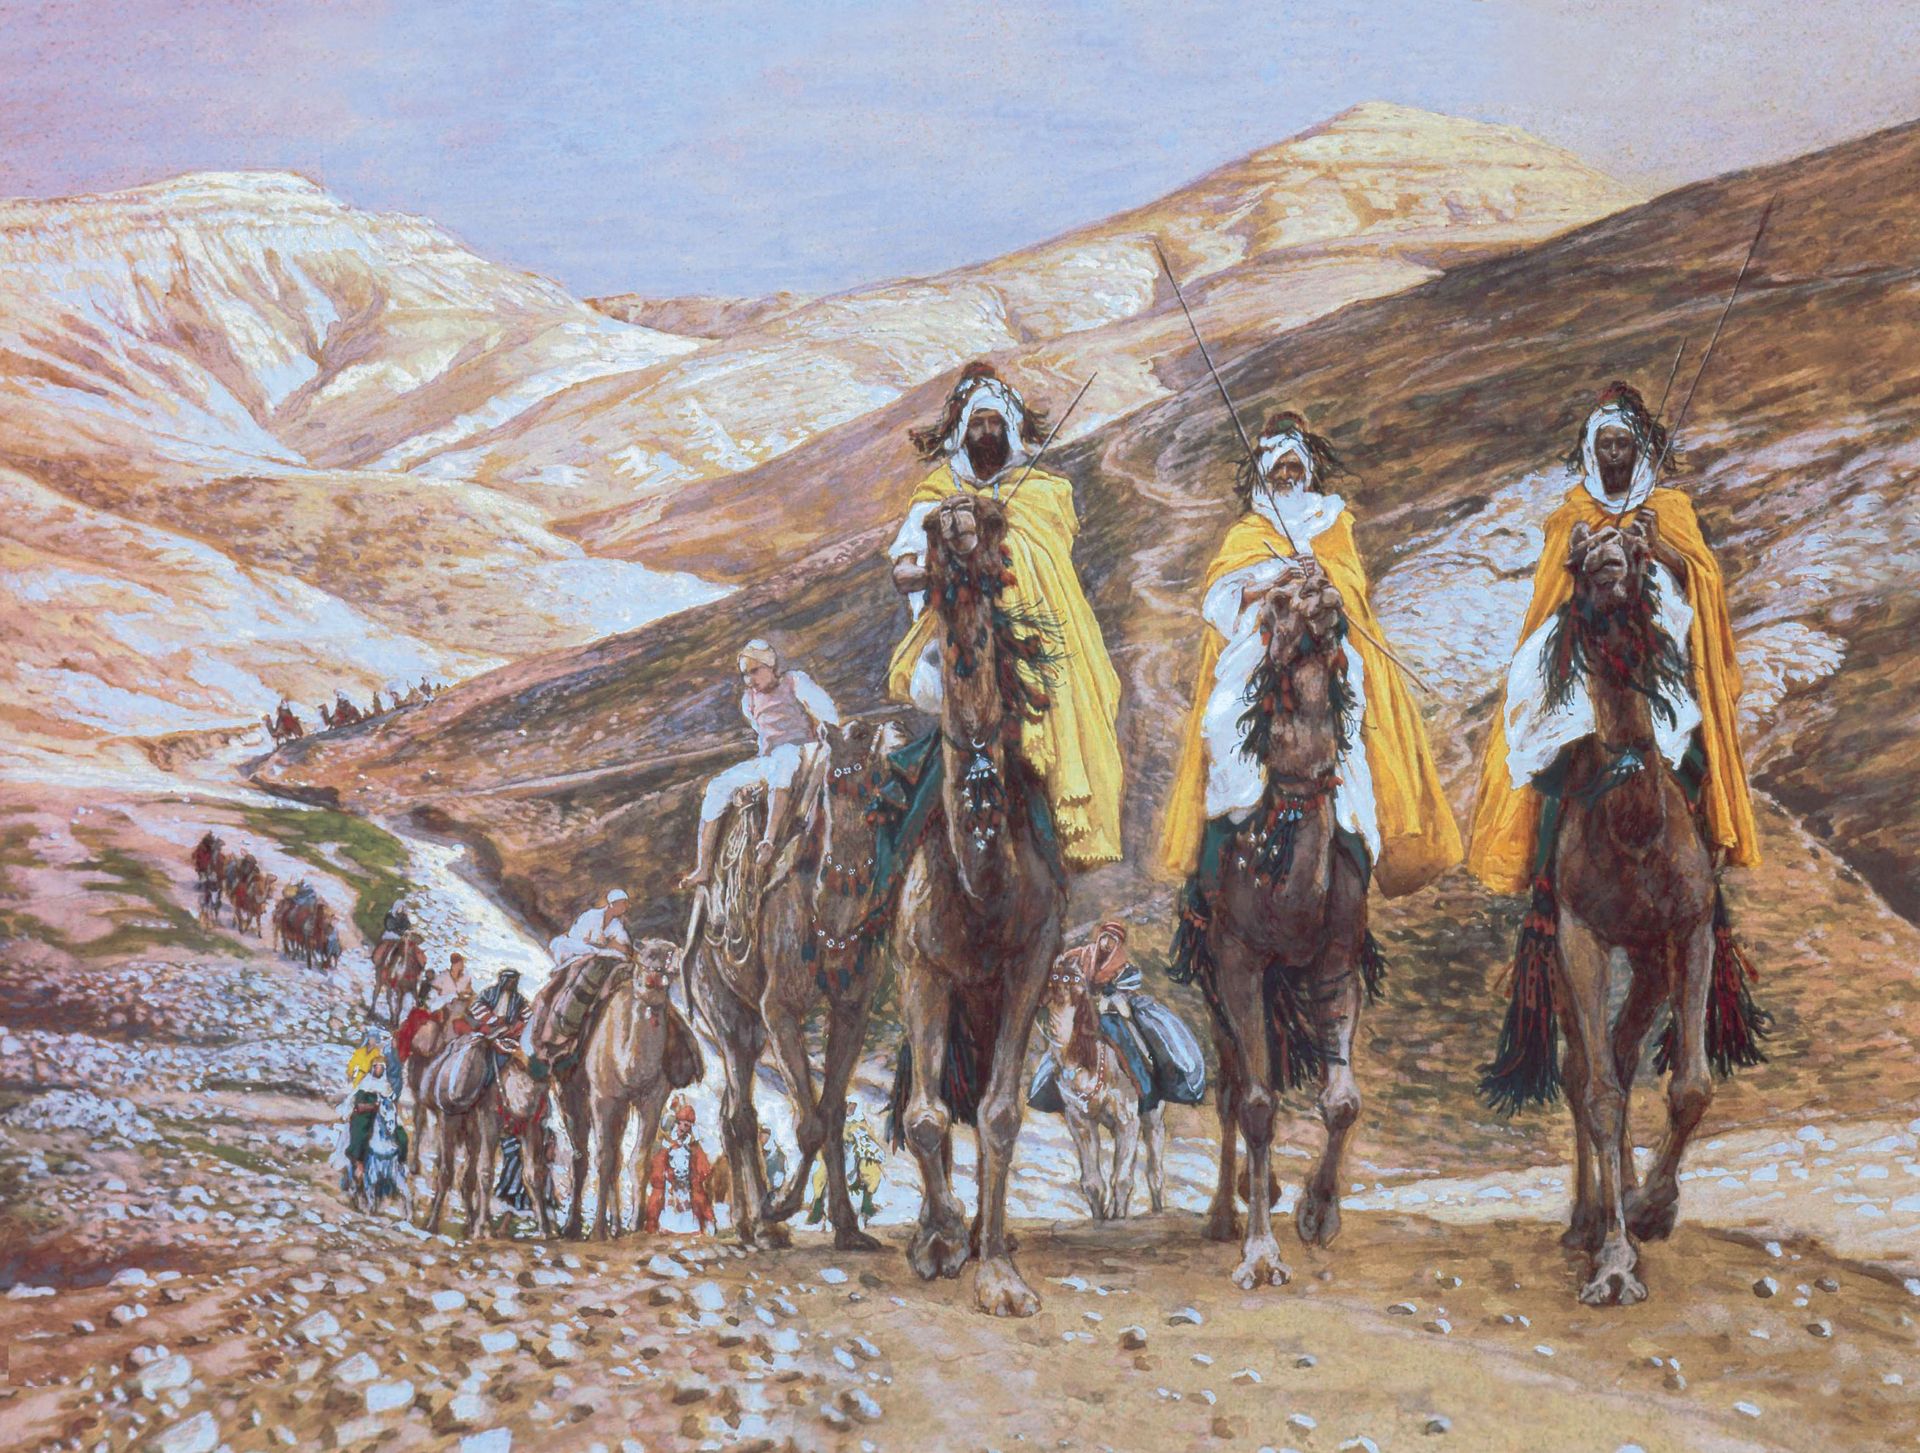 Journey of the Magi, by James Tissot